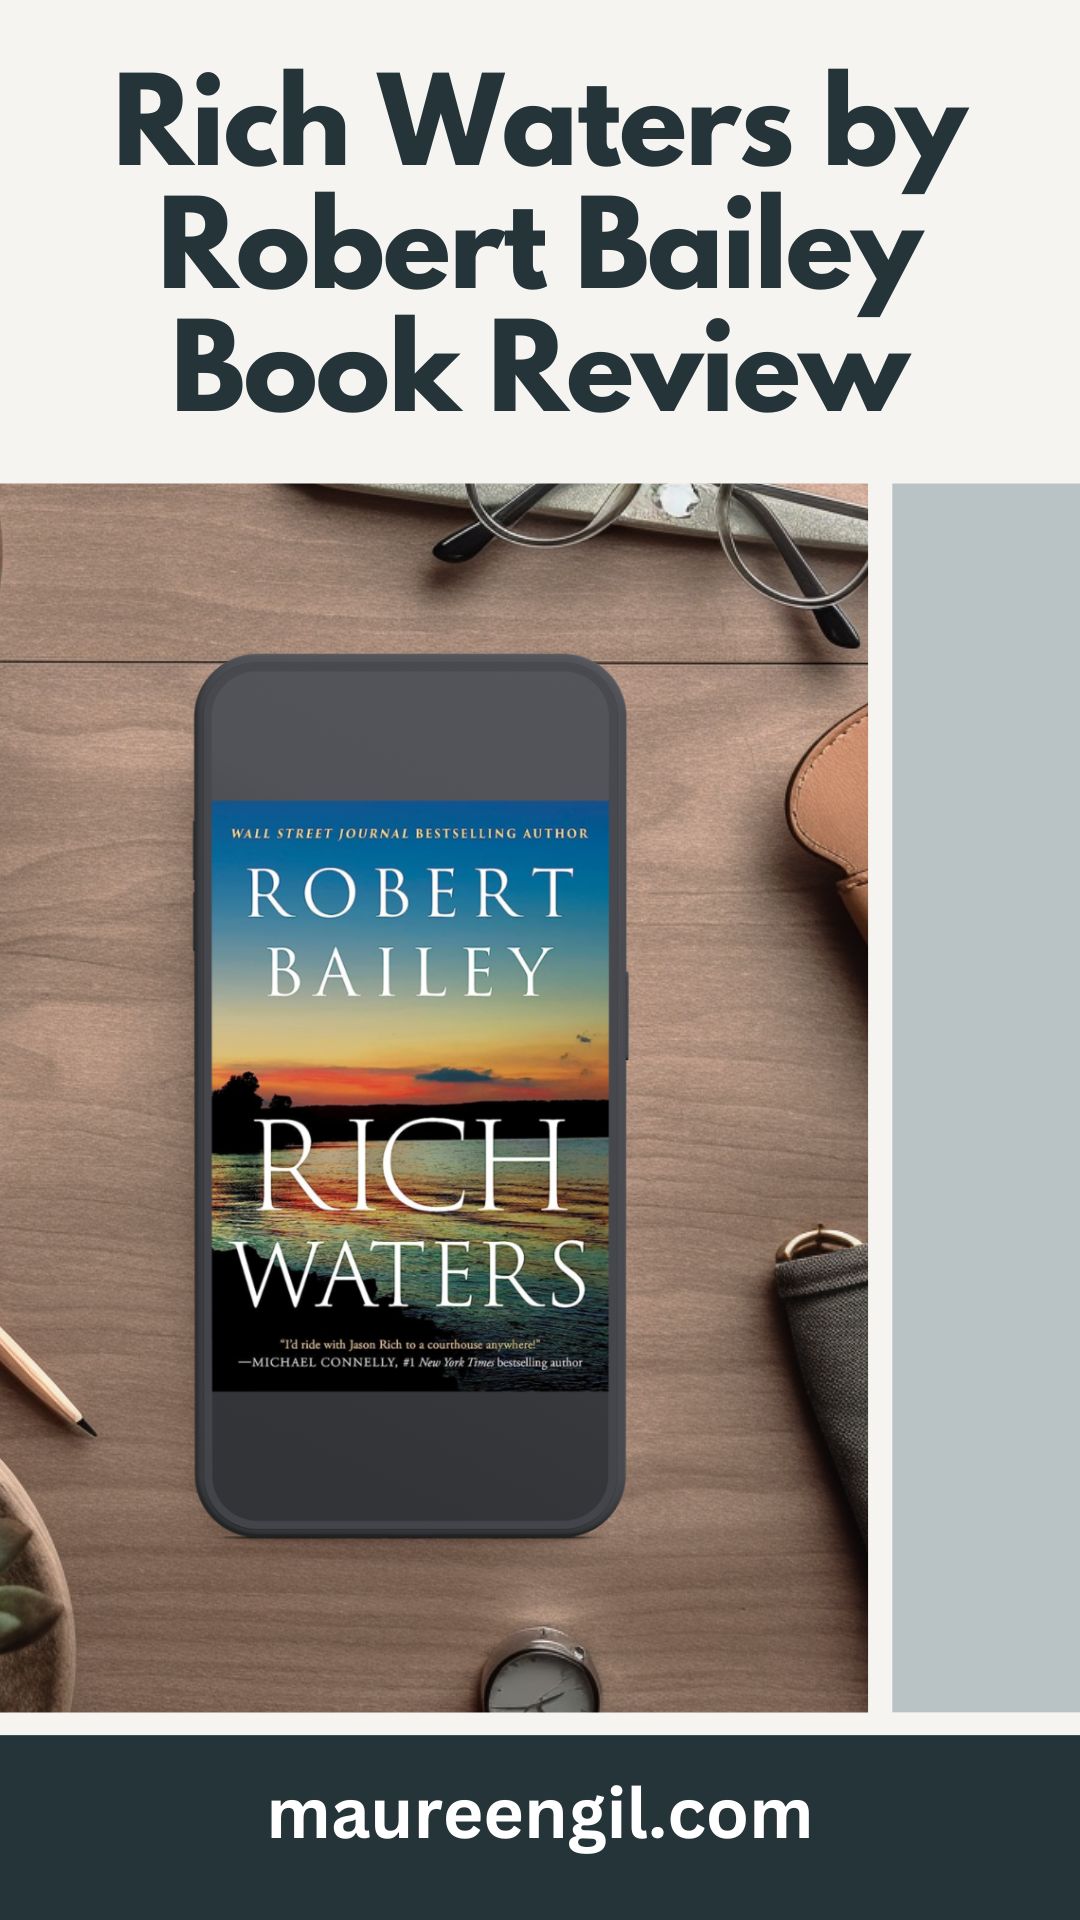 Are you a fan of legal thrillers? If so, read the Rich Waters by Robert Bailey book review. Attorney Jason Rich is forced to take a car from the crime meth boss, Tyson Cade. When a local police officer Kelly Flowers is found murdered, the police arrest Trey Cowan, who was seen arguing with the victim early in the evening. It's up to Jason Rich to prove his client was innocent. #BookReview #LegalThriller #Bookstagram